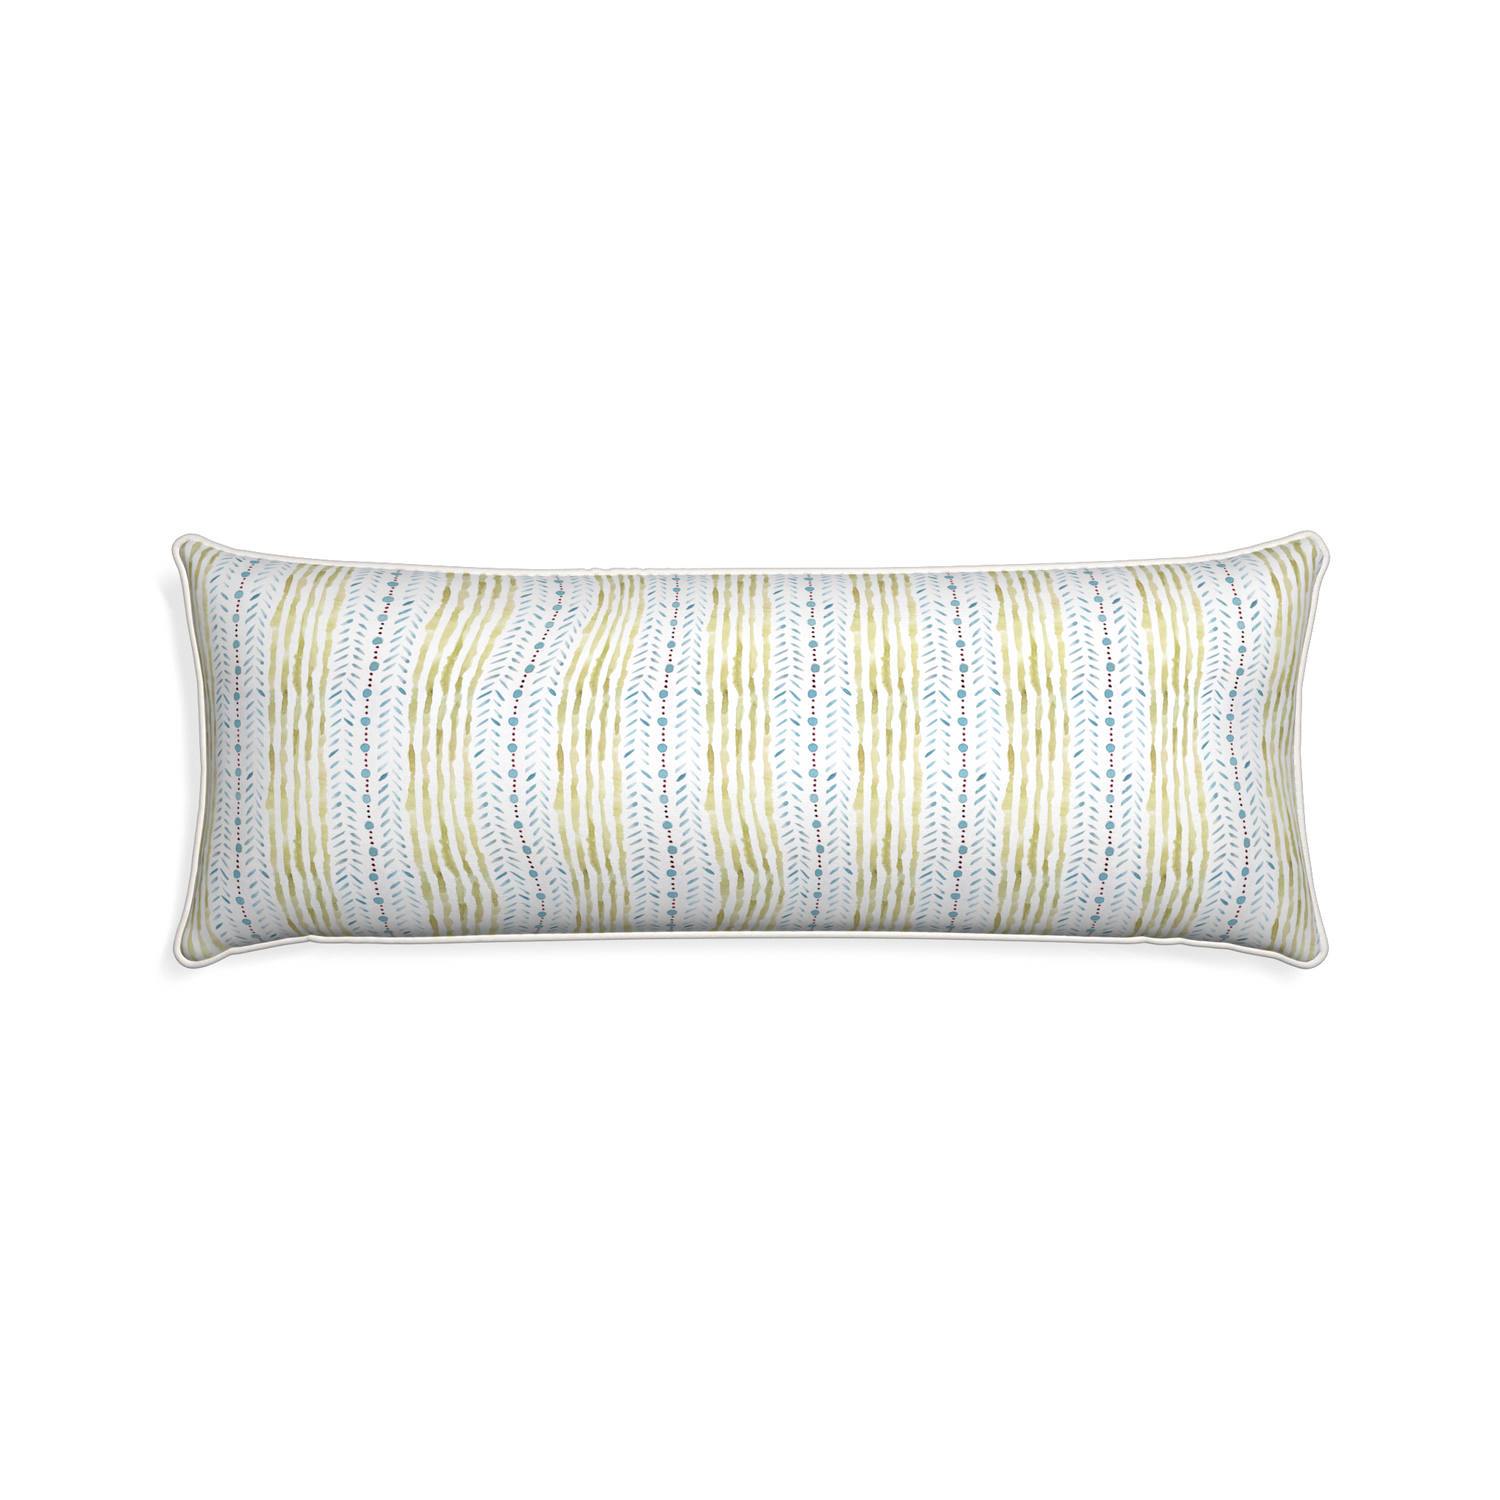 Xl-lumbar julia custom blue & green stripedpillow with snow piping on white background